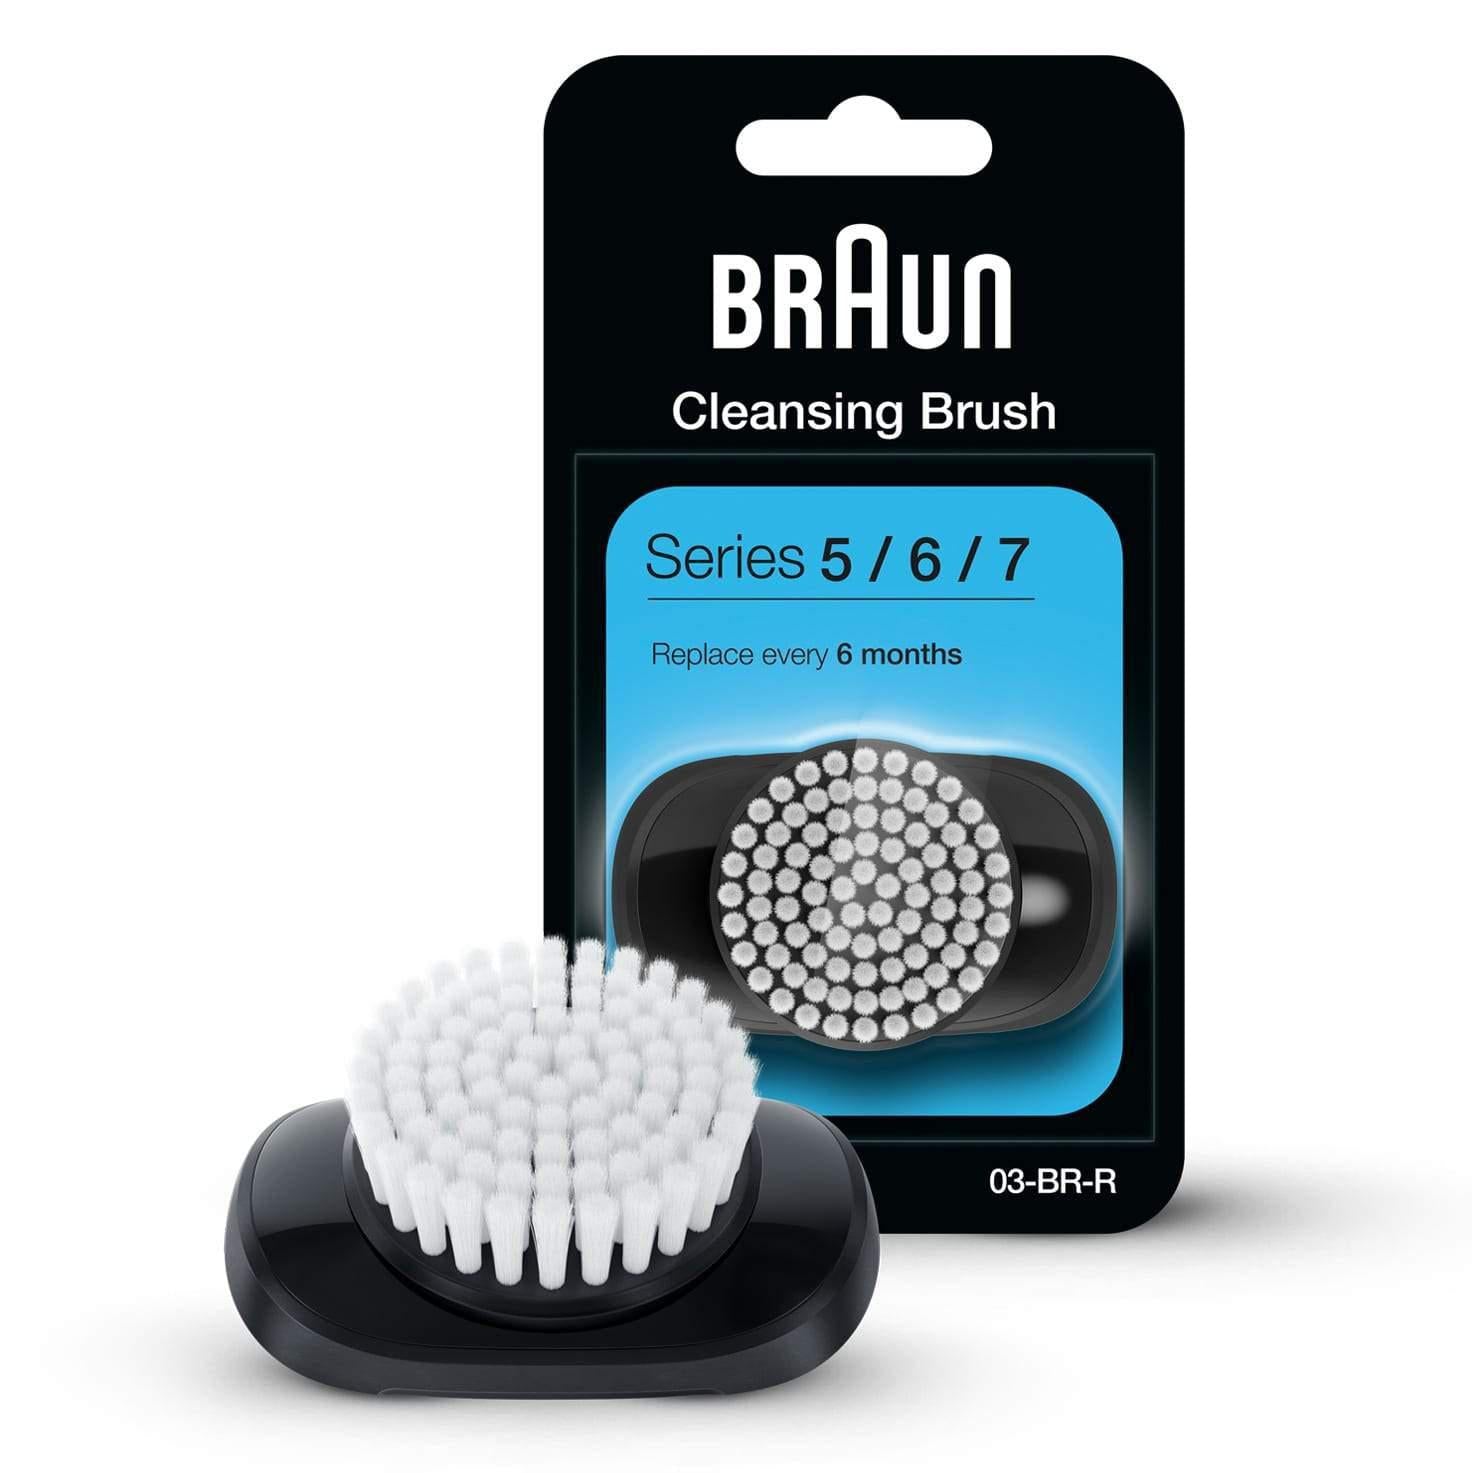 Braun EasyClick BR-R Cleansing Brush for Braun Series 5, 6 and 7 Electric Shavers 2020 Models Only - Healthxpress.ie